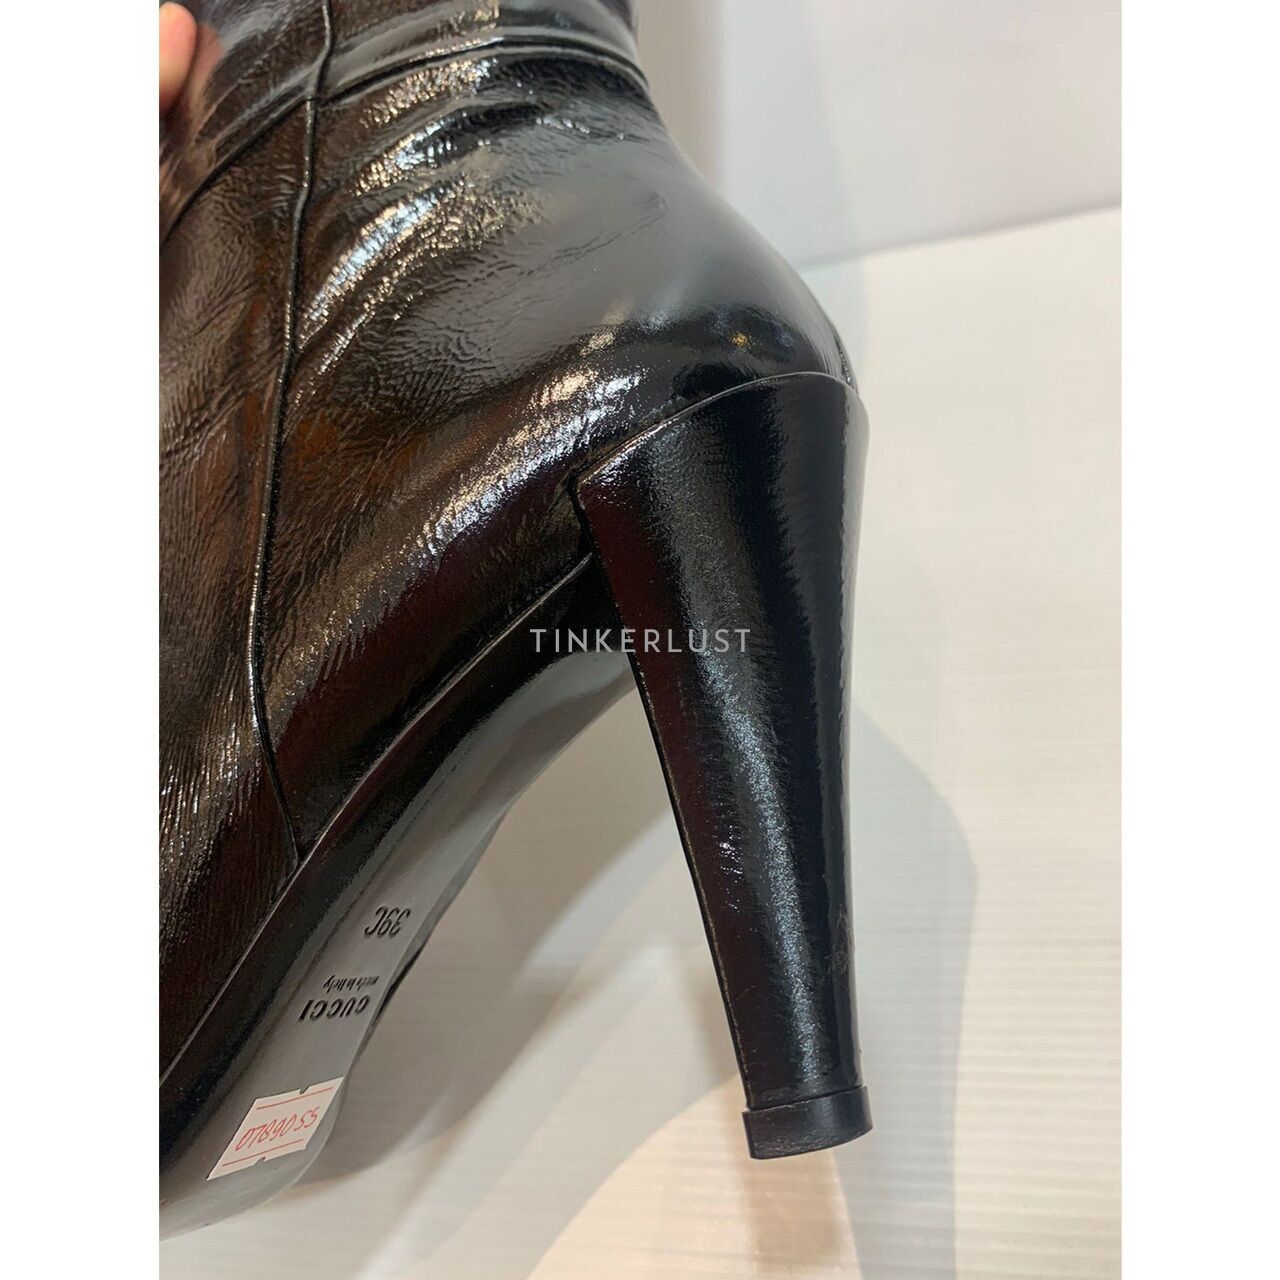 Gucci Hysteria Patent Leather Black Knee High Boots